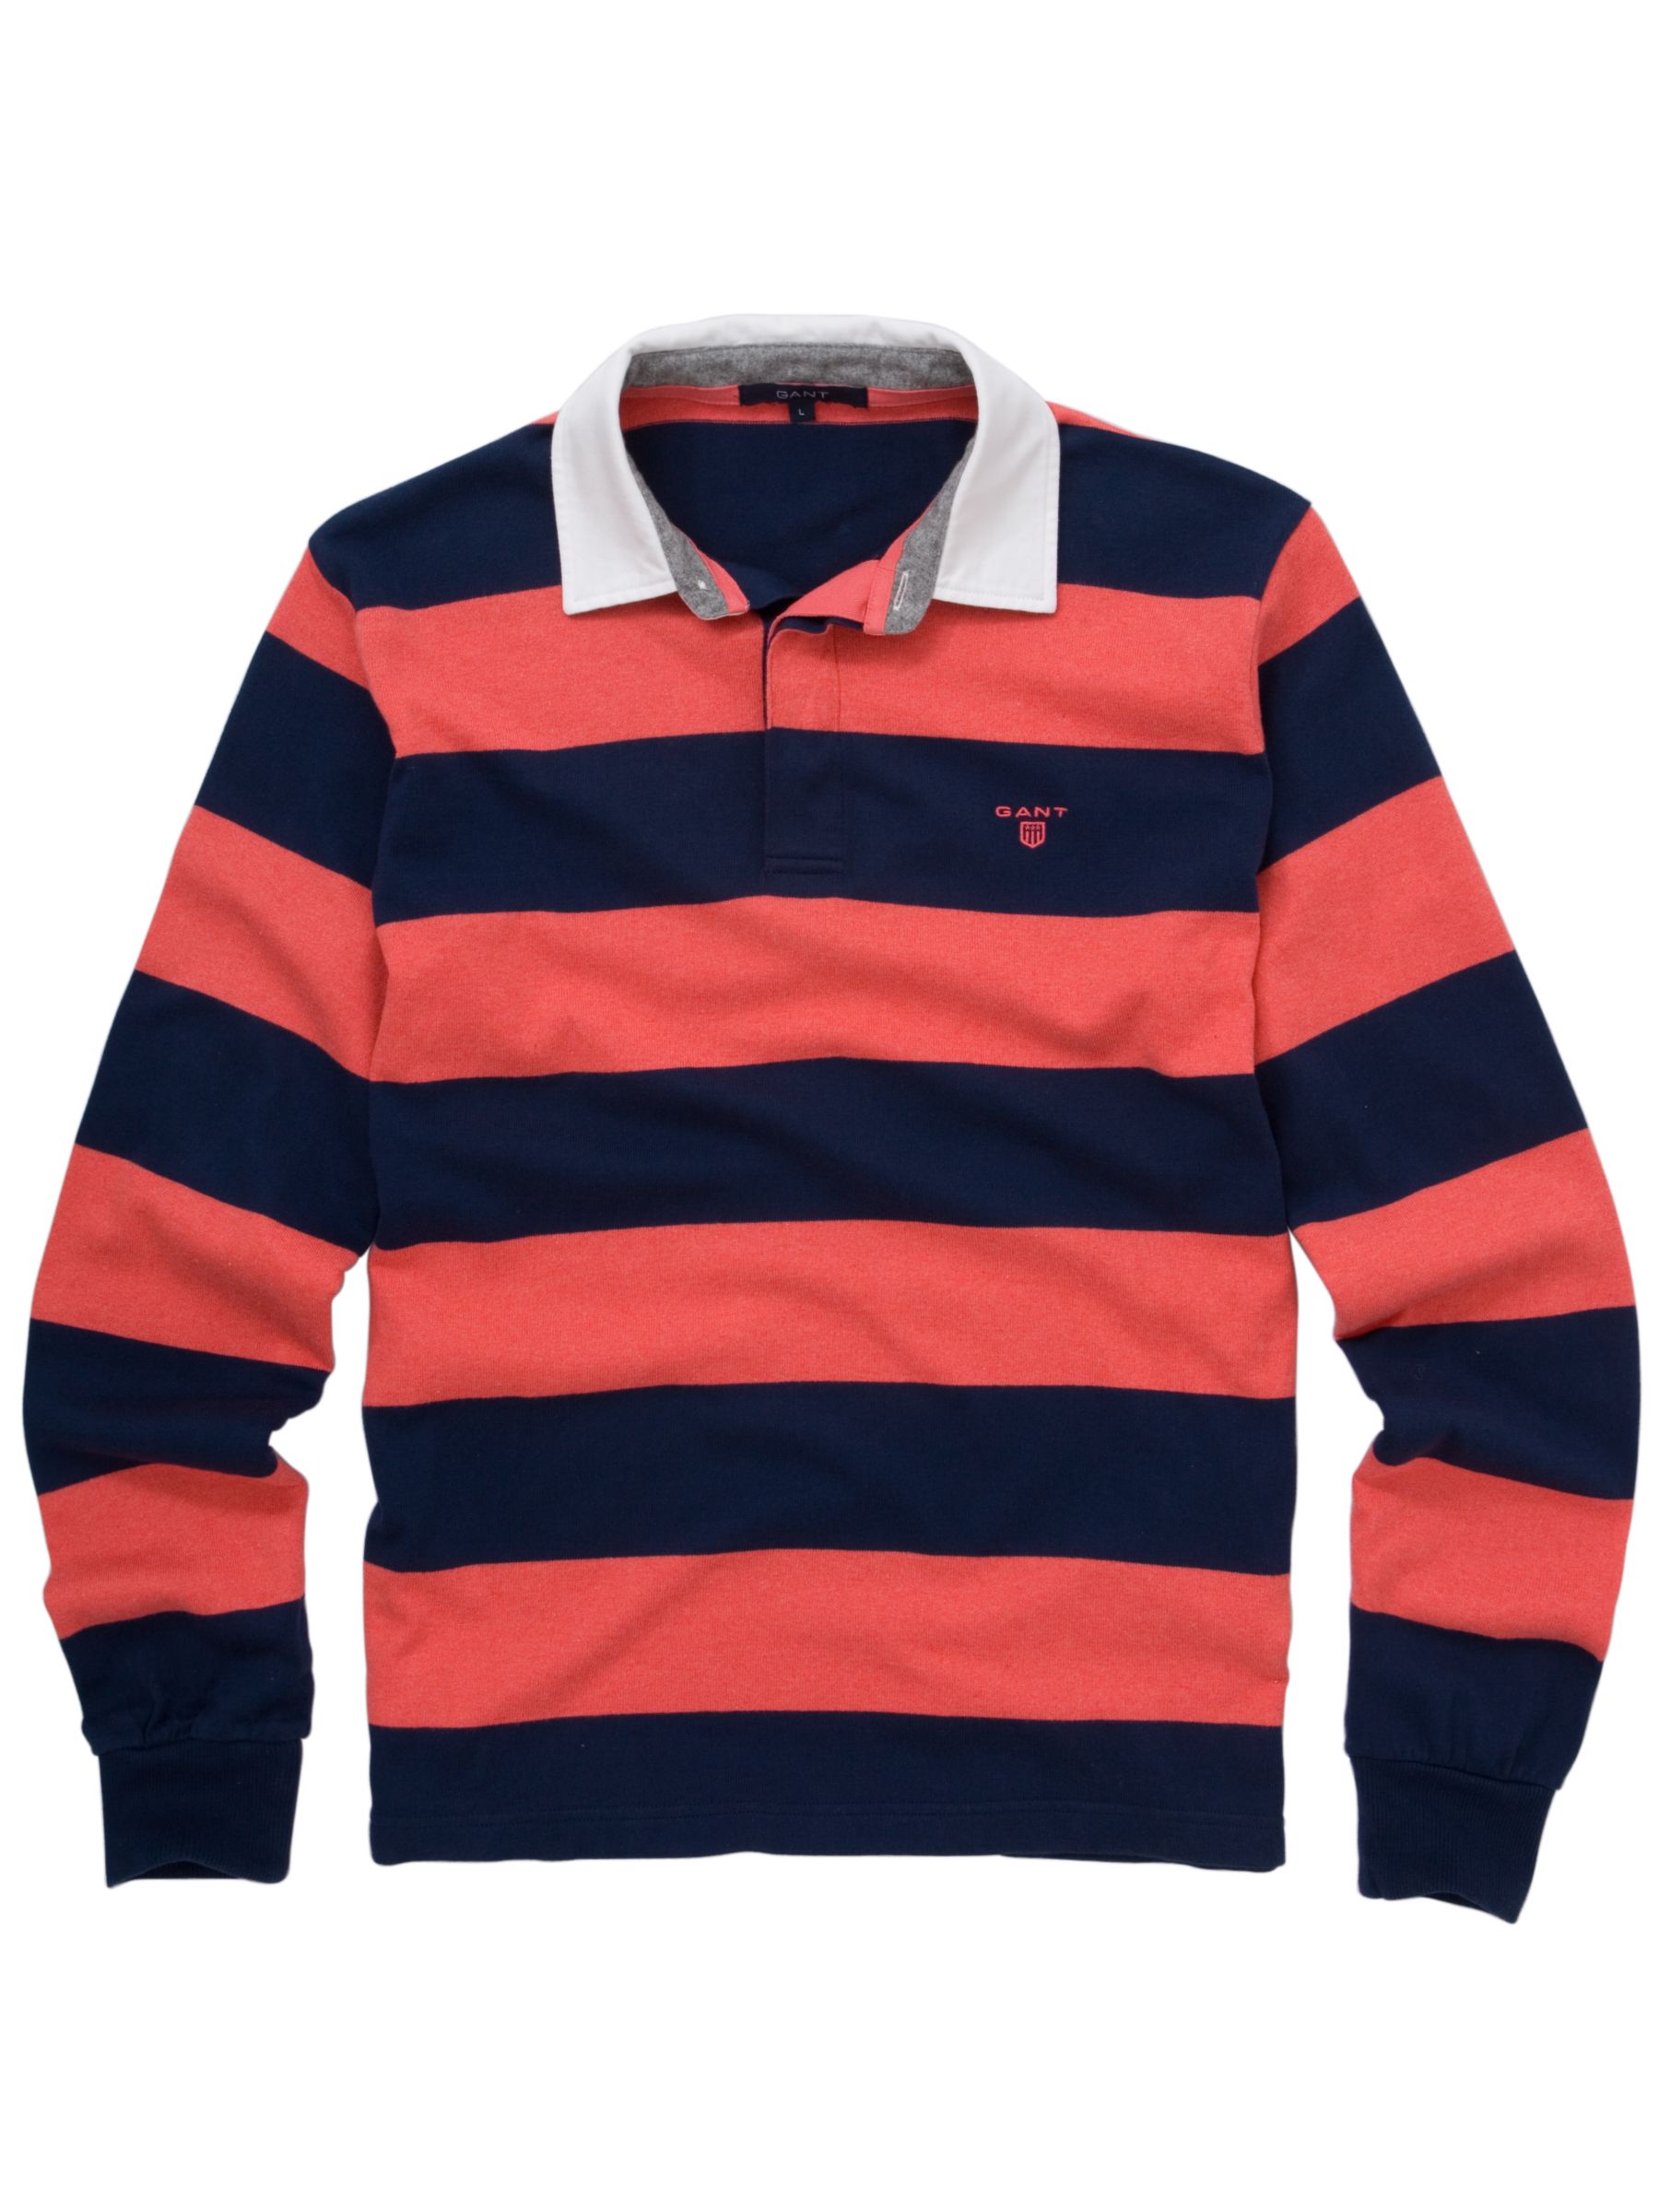 Classic Barstripe Rugby Shirt, Coral/Navy